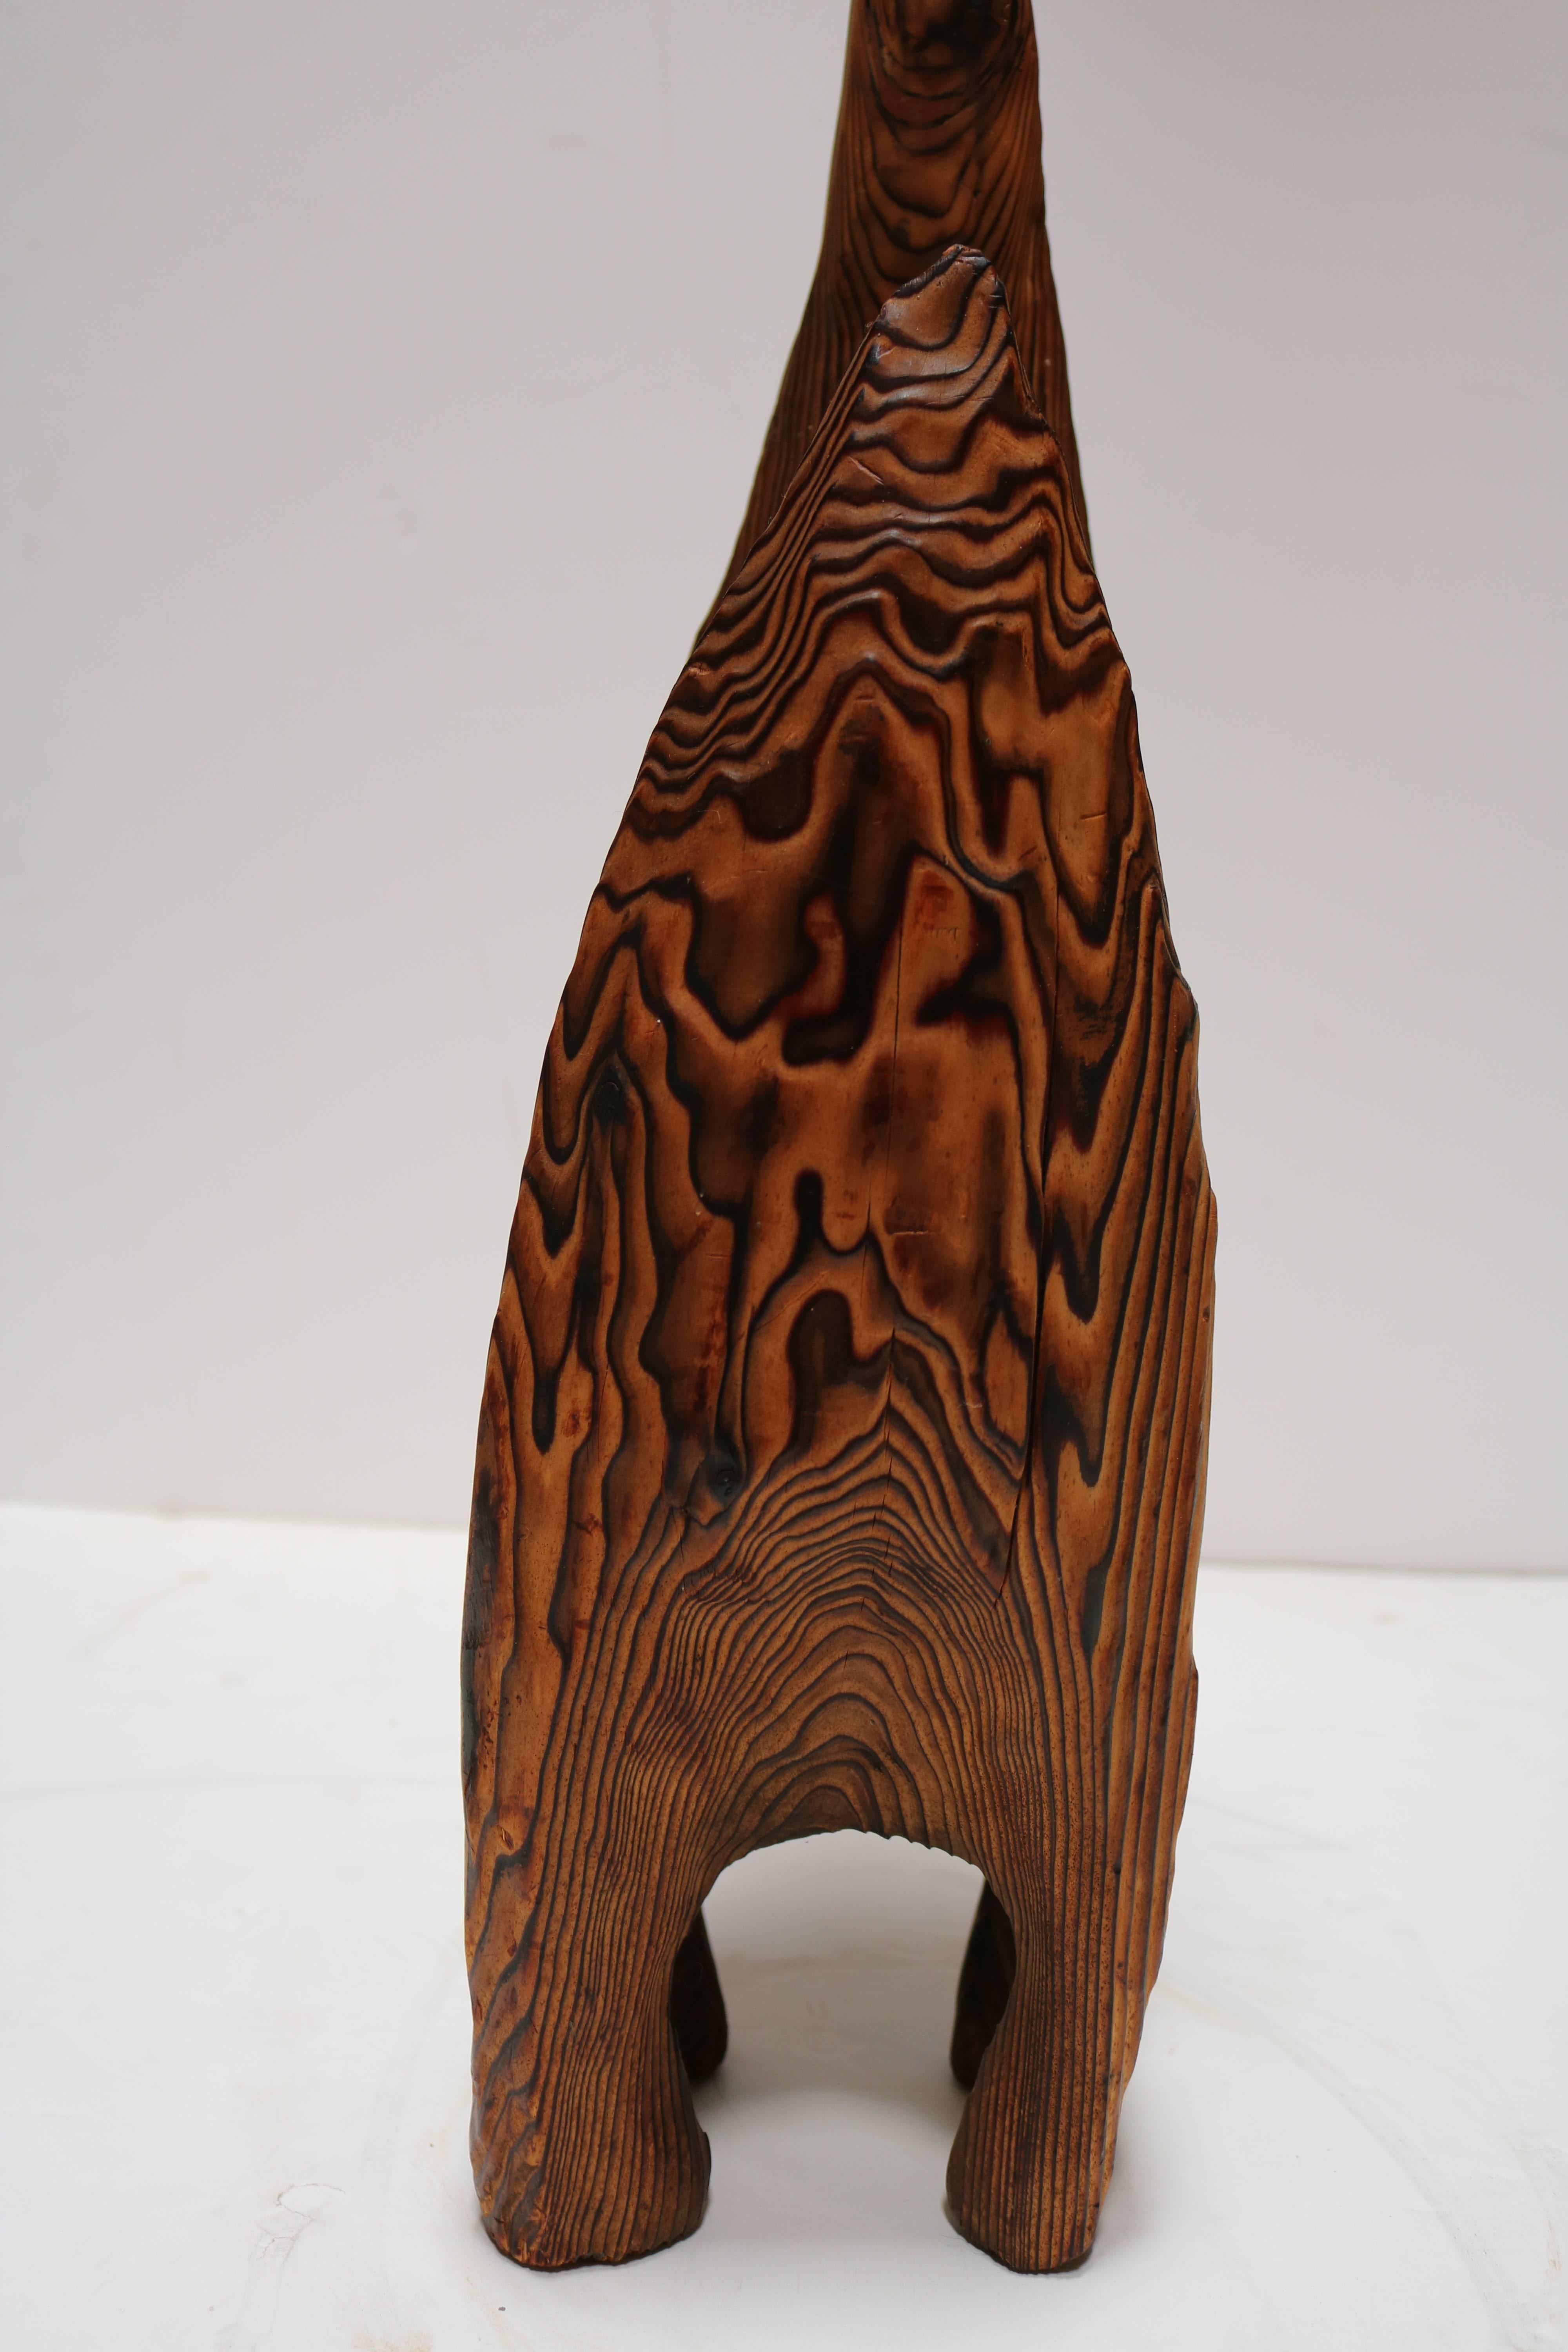 Striking Bocote Wood Sculpture of a Cat with Blue Eyes 1